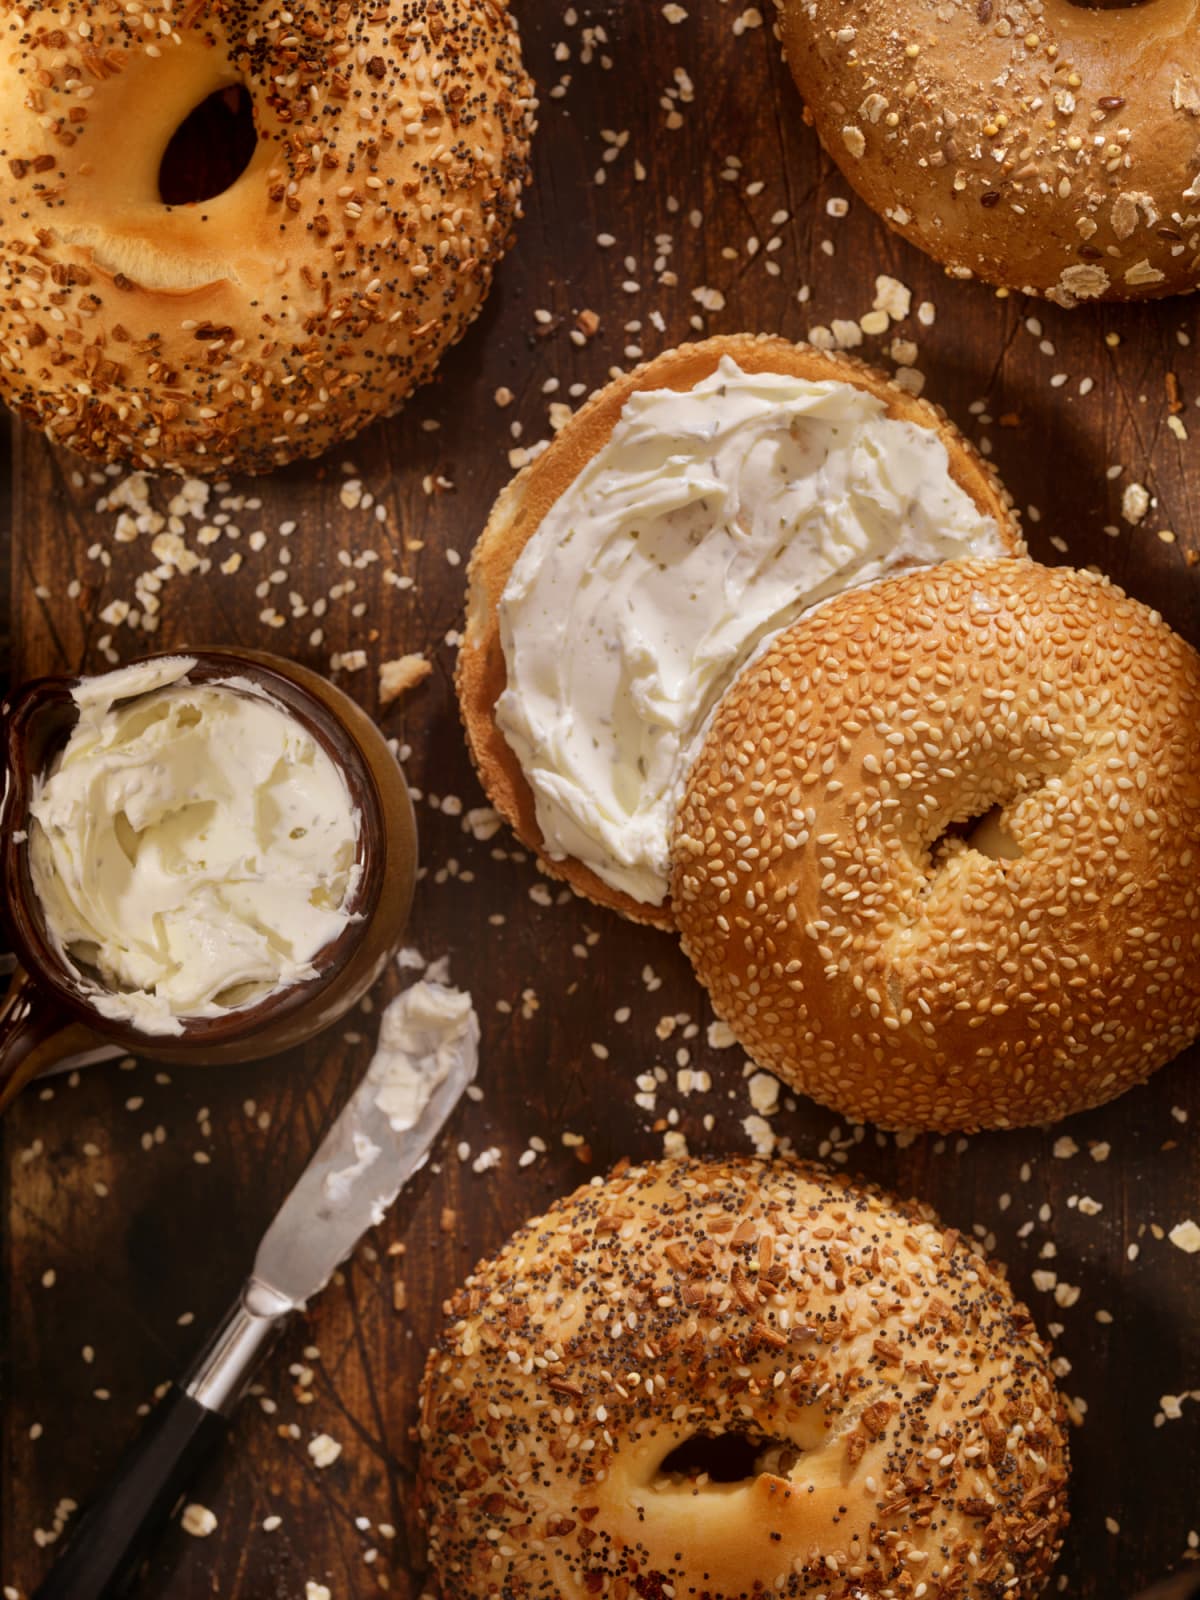 Toasted bagels on wooden surface with cream cheese and knife